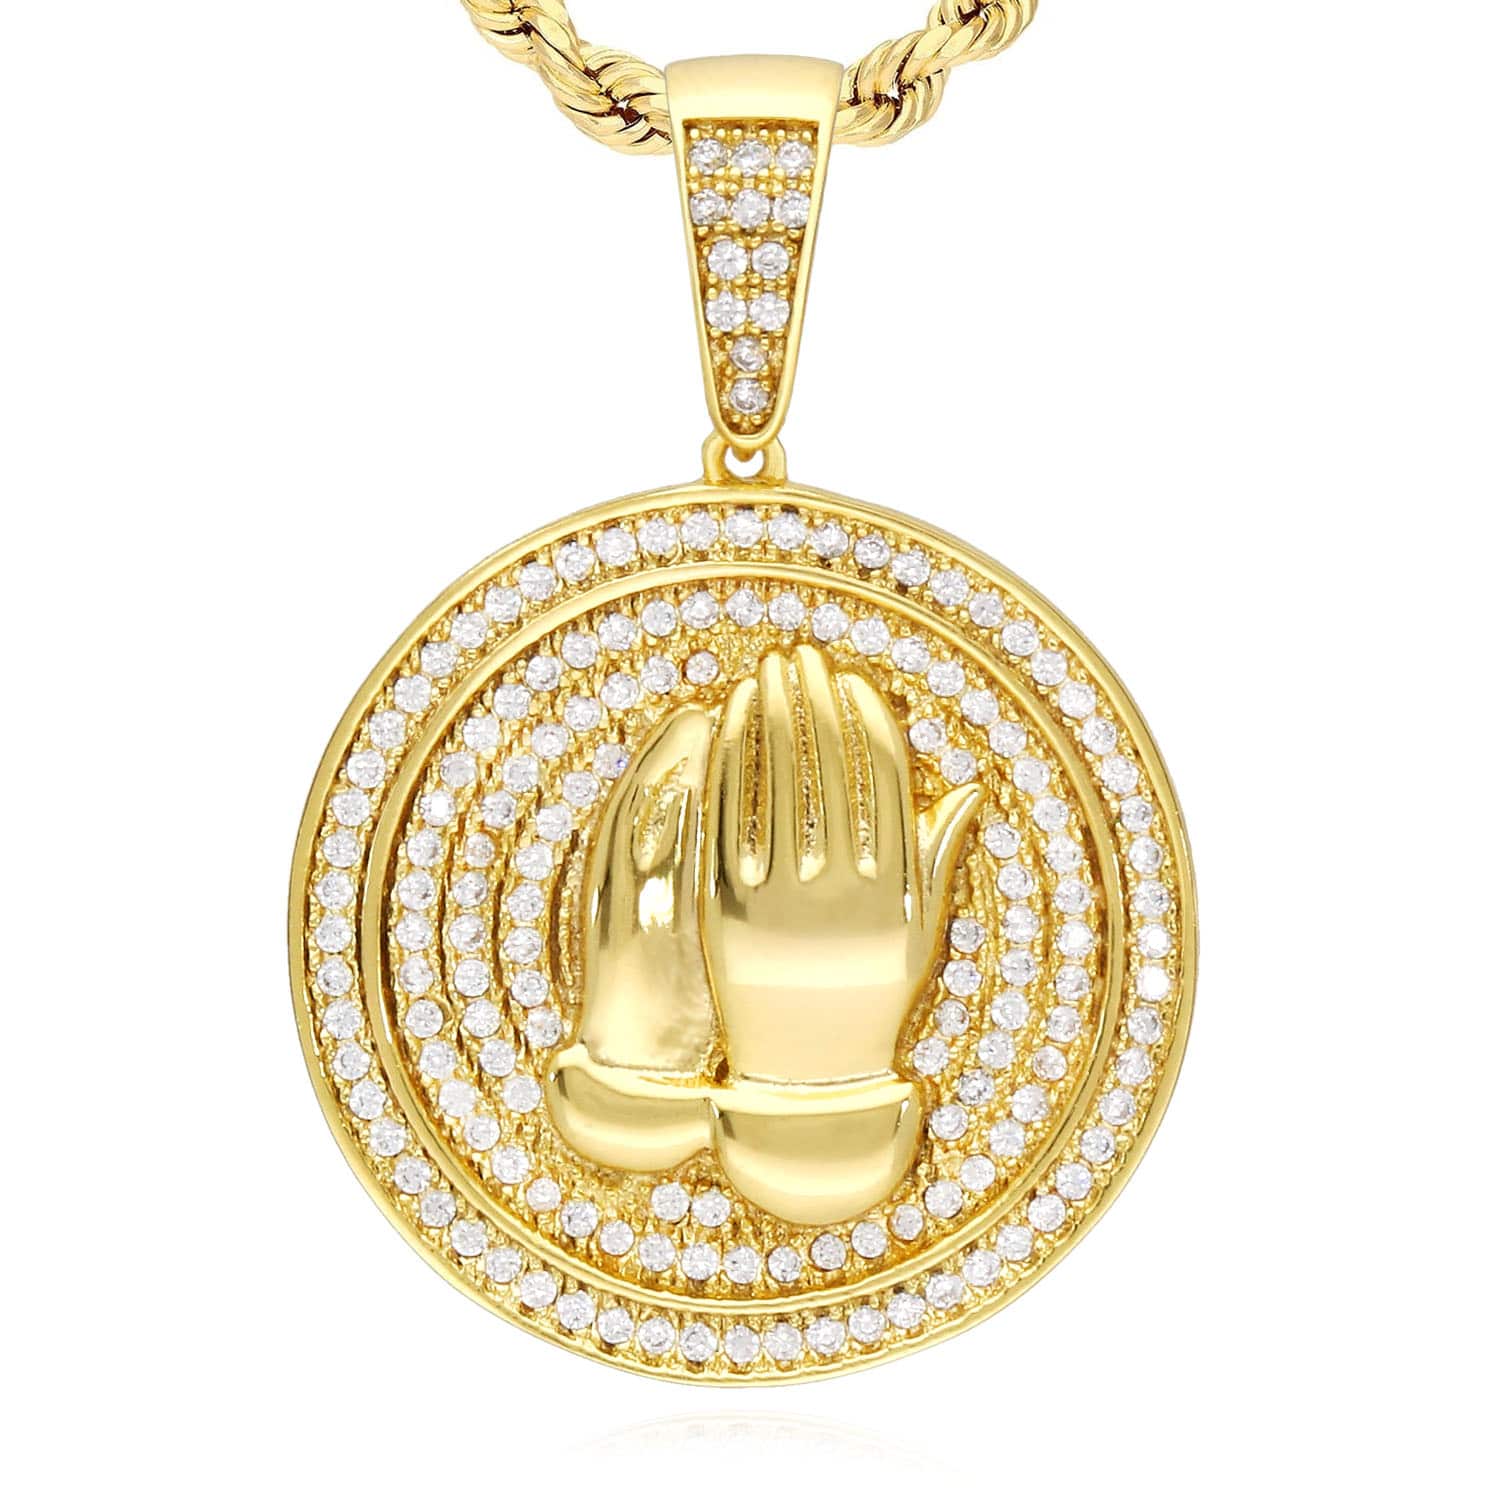 14k Gold Over Silver Simulated Diamond Praying Hands Medallion Pendant 1.38" - Yellow Gold Plated